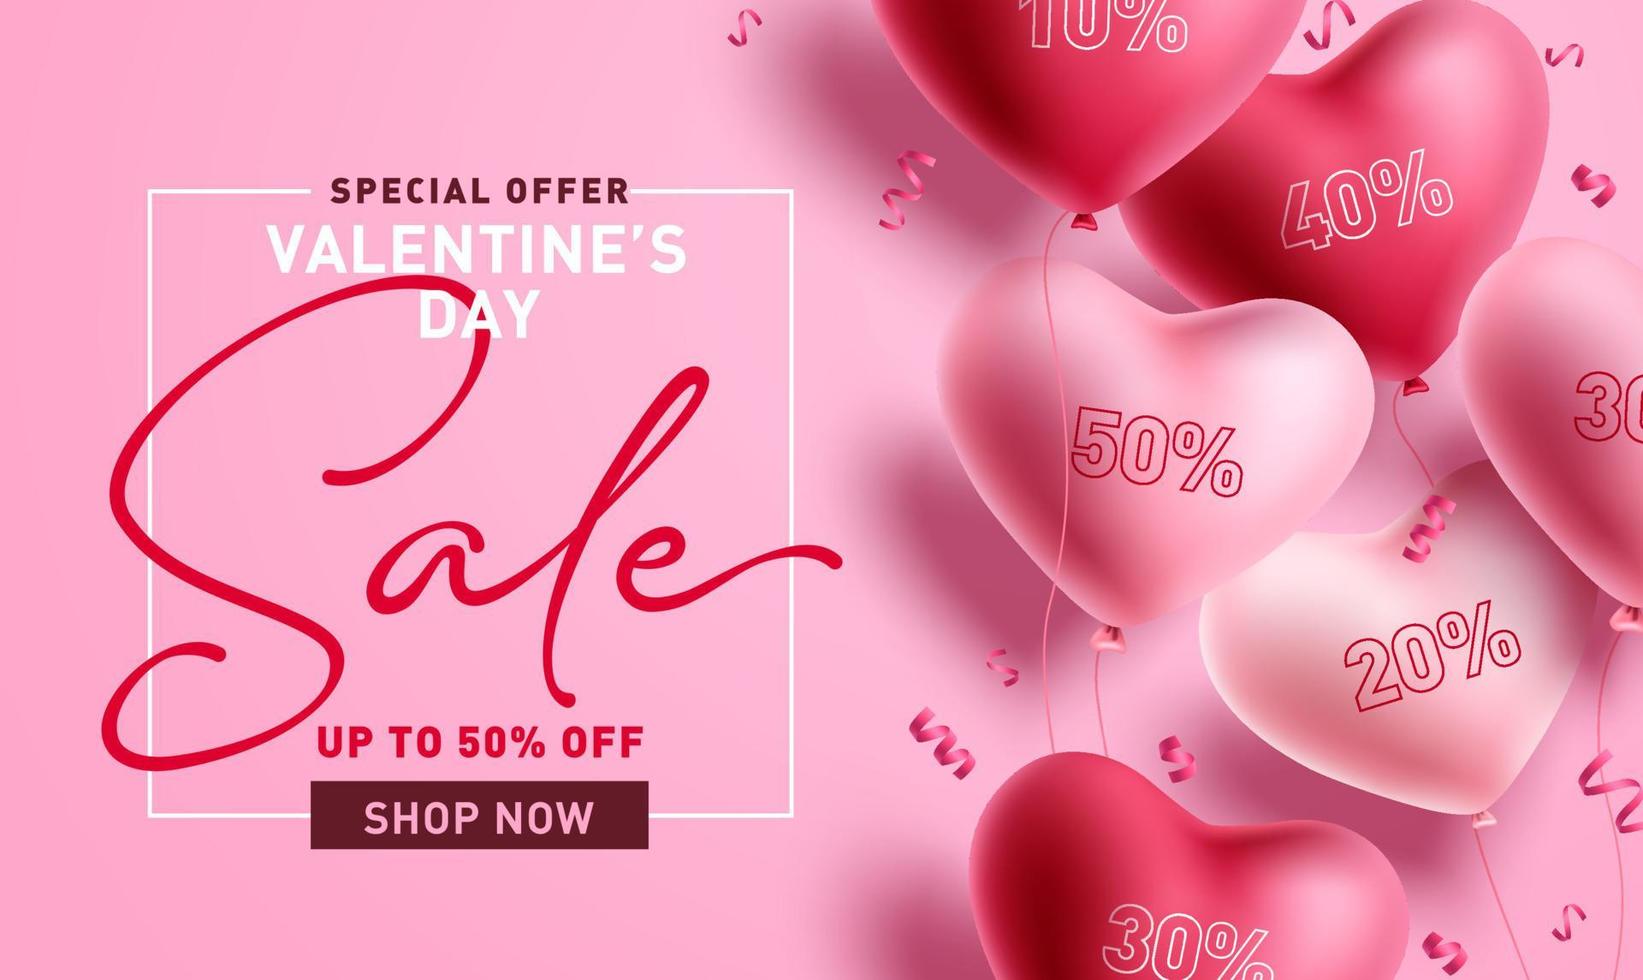 Valentine's day sale vector banner. Valentine's promo discount for hearts day promotion background design.